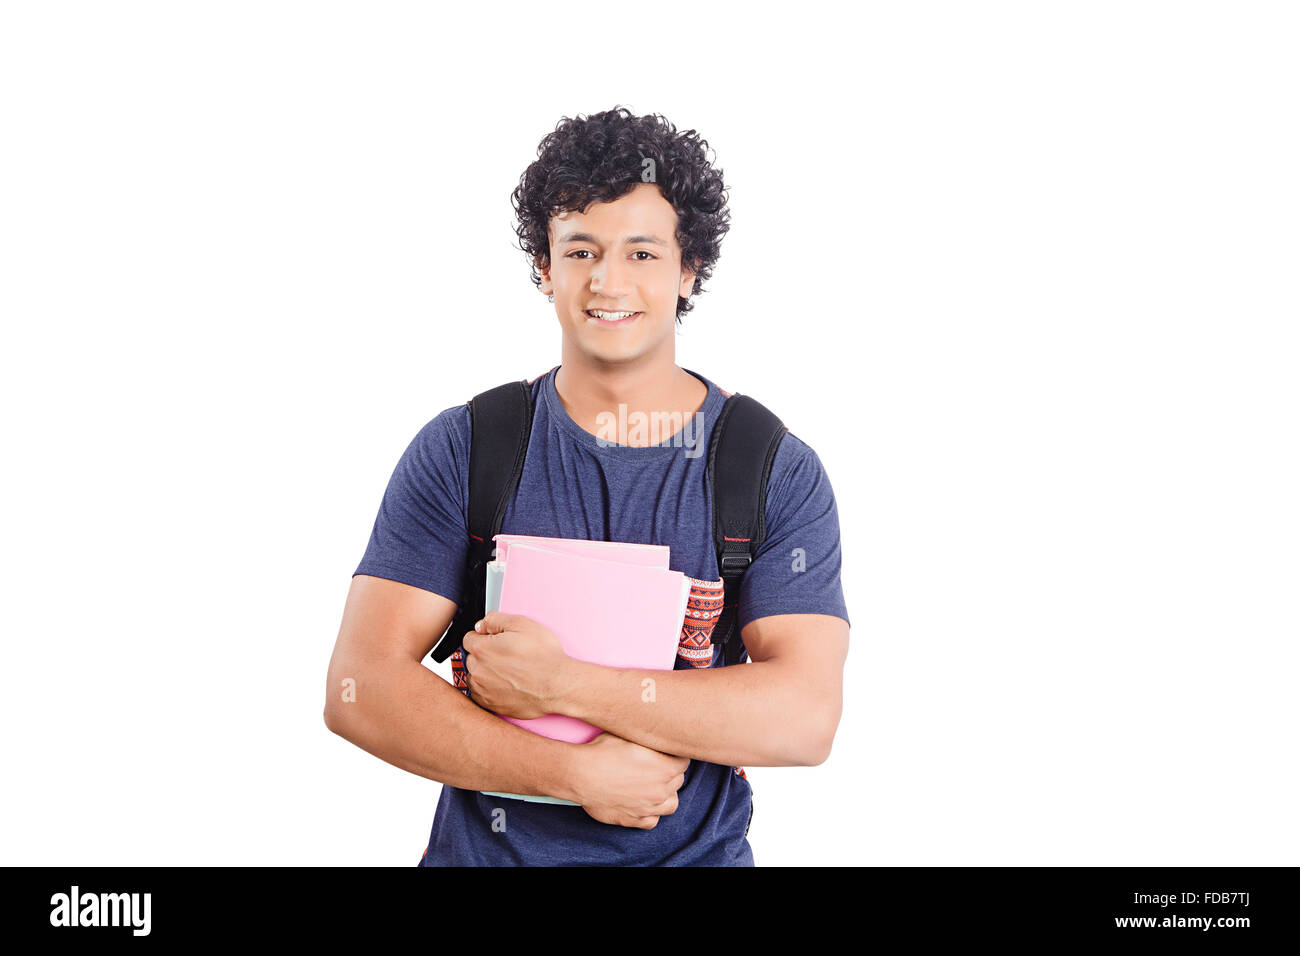 1 Teenager boy College Student Holding Book Standing Stock Photo - Alamy